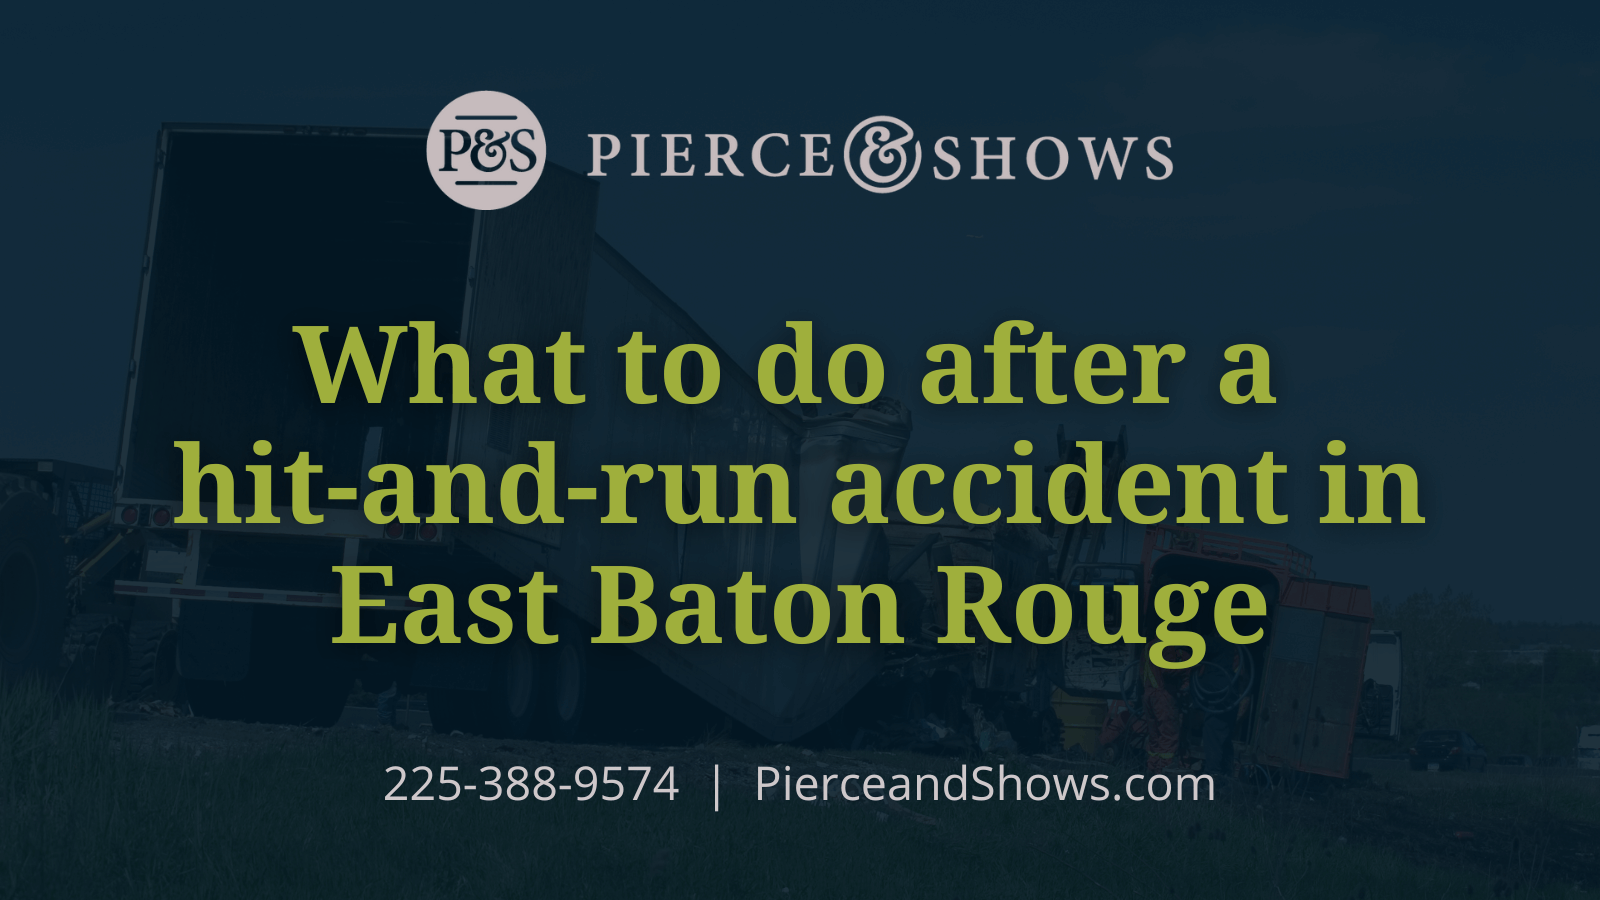 hit-and-run accident in East Baton Rouge- Baton Rouge Louisiana injury attorney Pierce & Shows